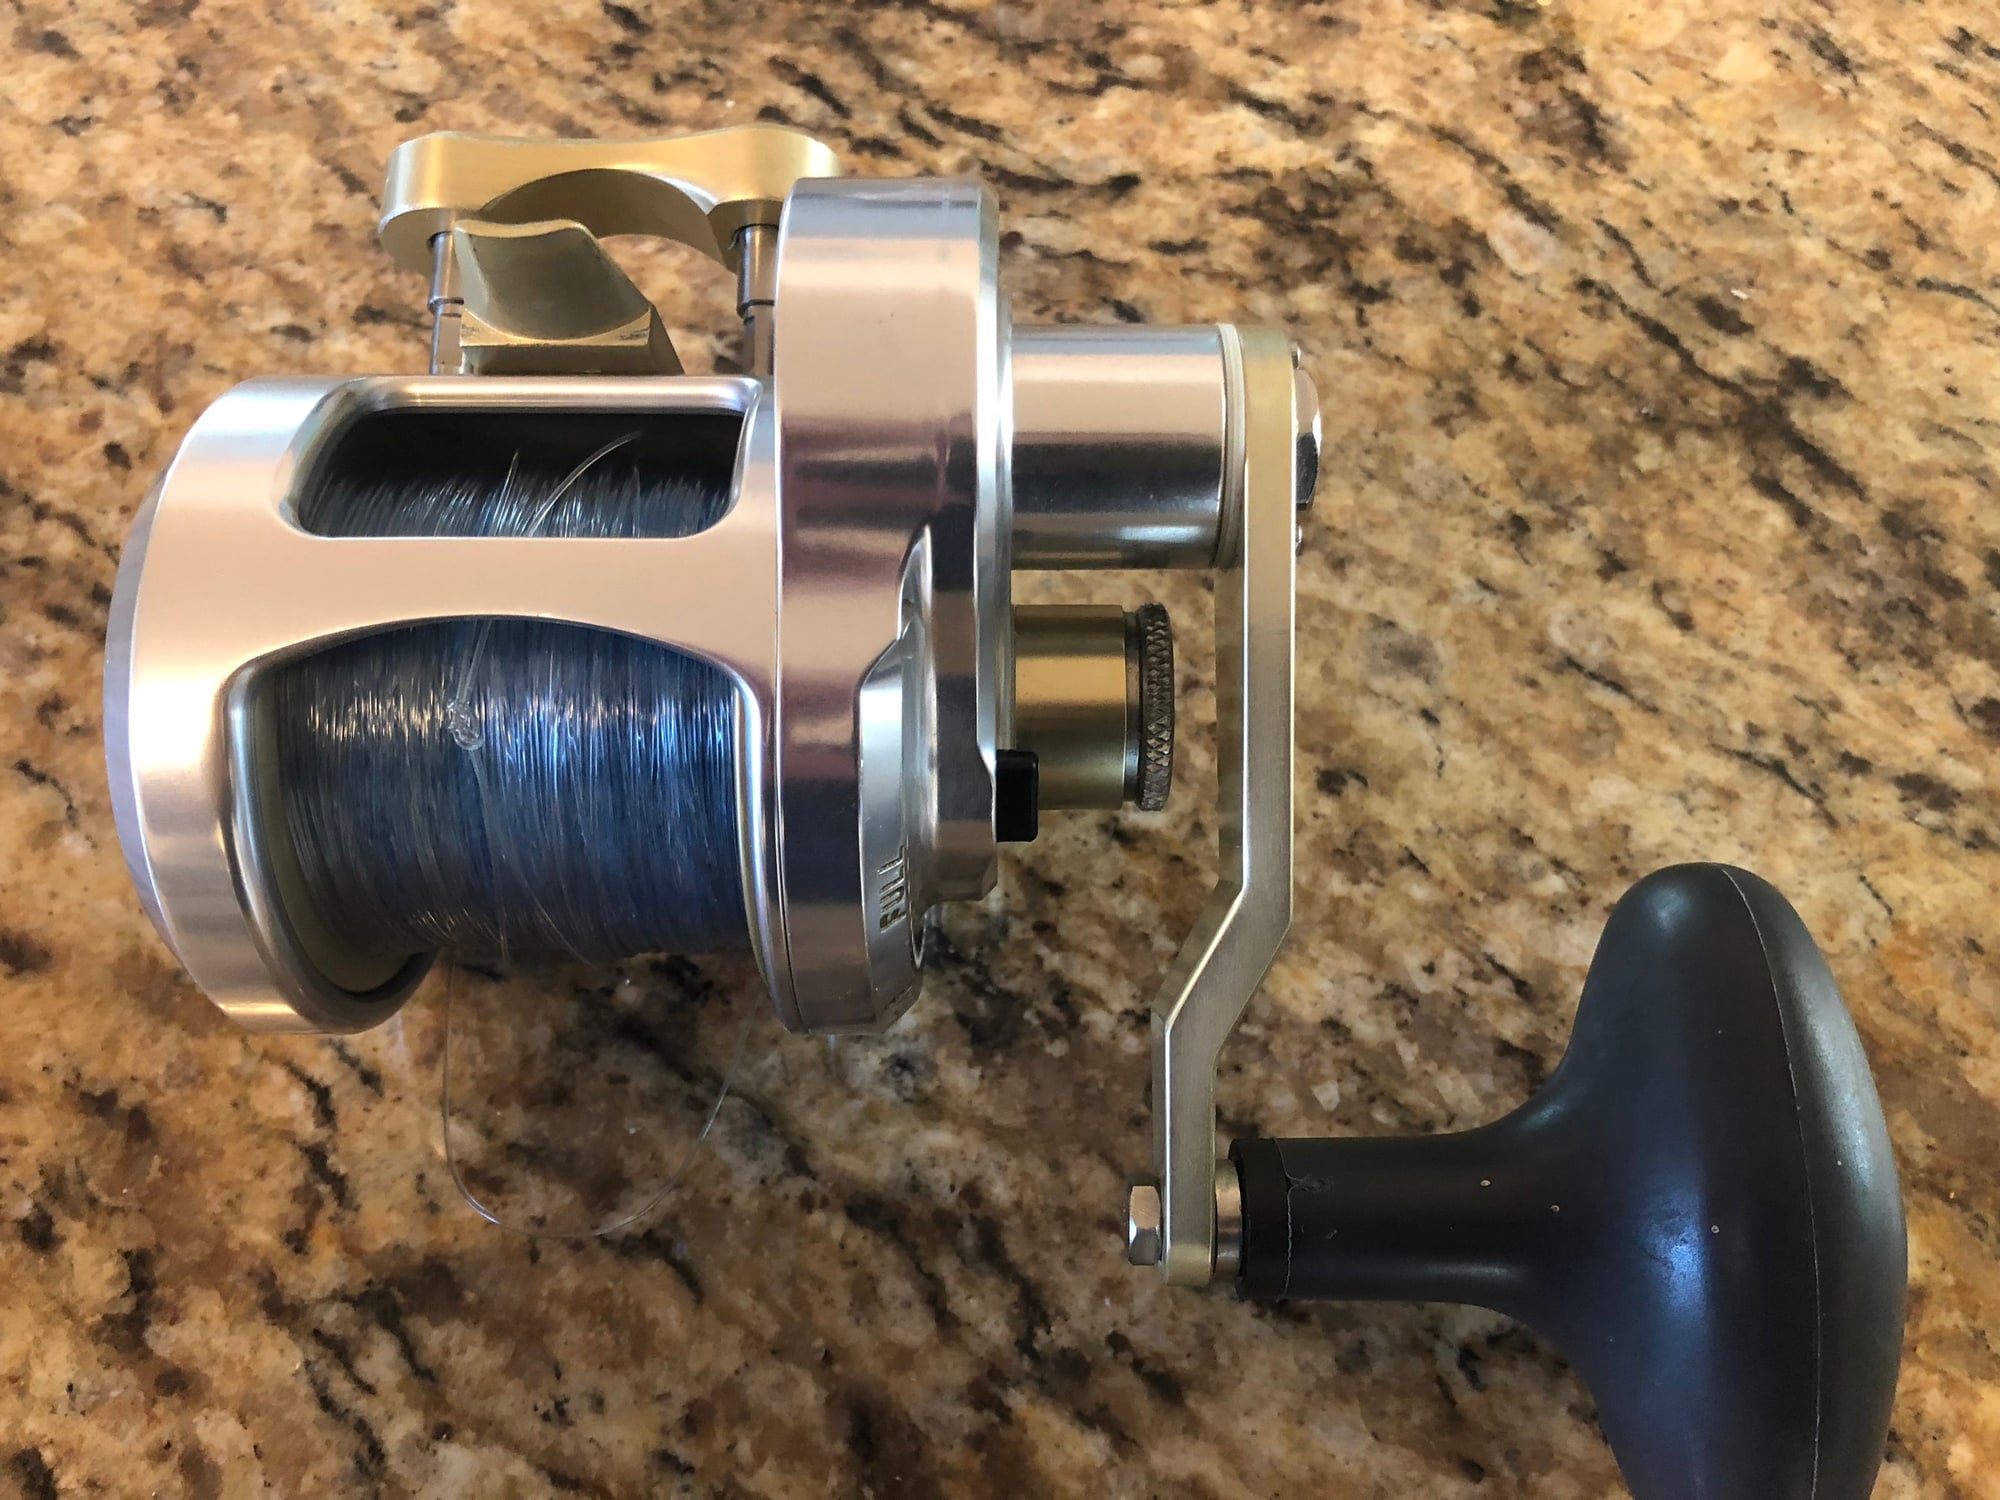 2 new accurate boss fury 500n - The Hull Truth - Boating and Fishing Forum